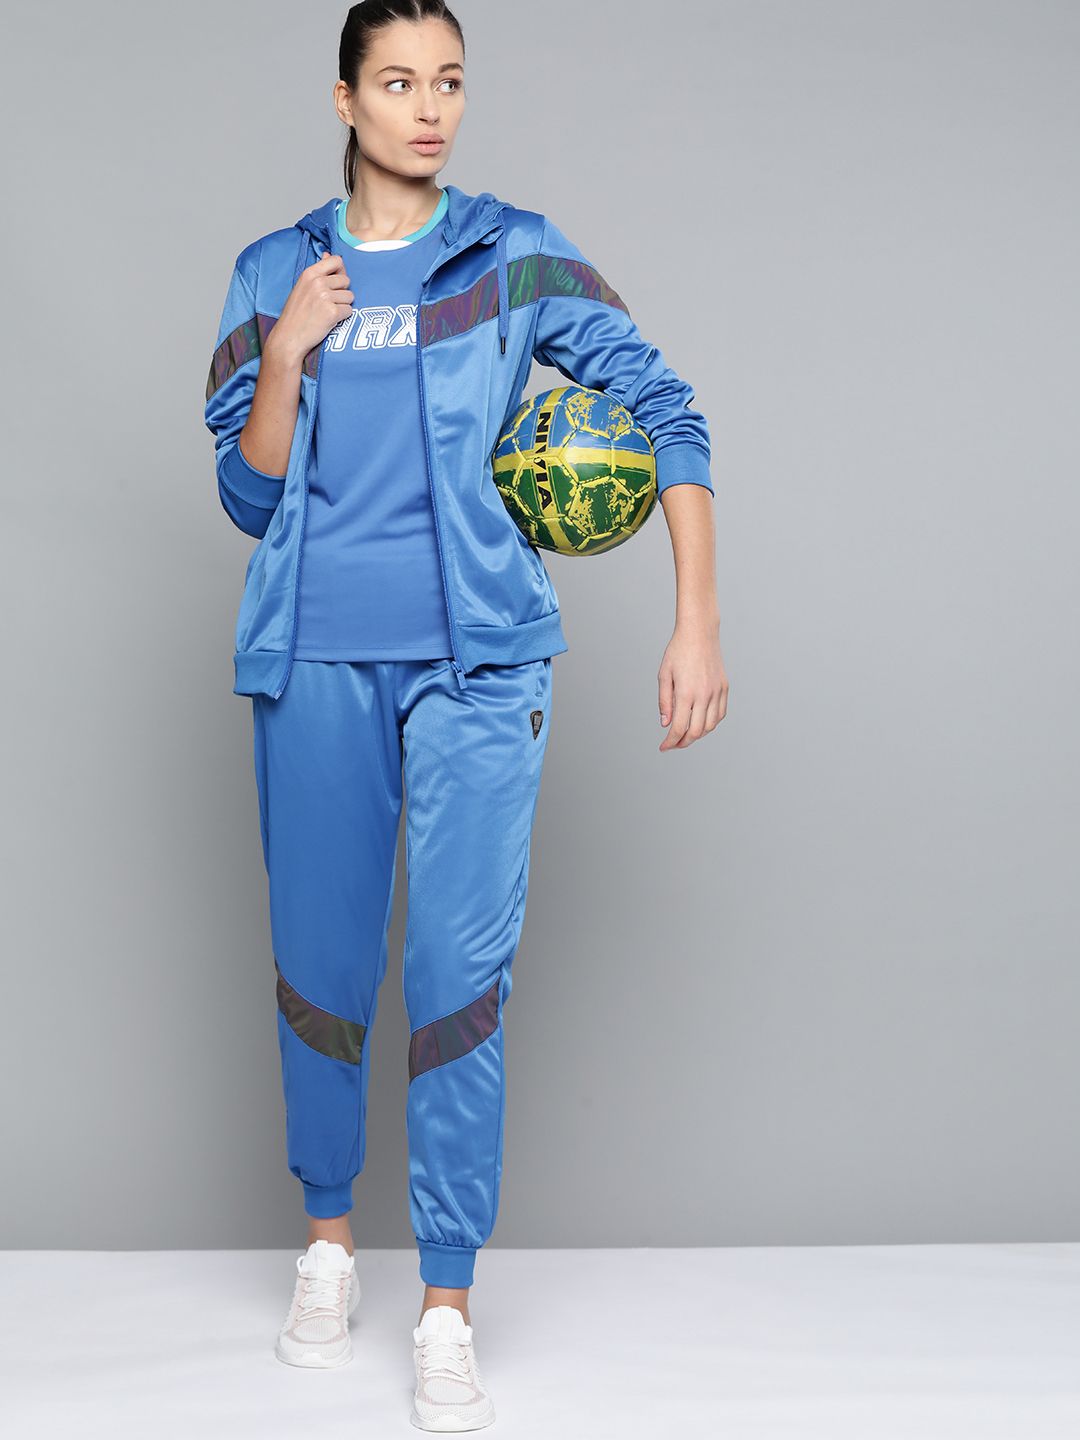 HRX by Hrithik Roshan Women Blue & Grey Colorblocked Football Tracksuit Price in India